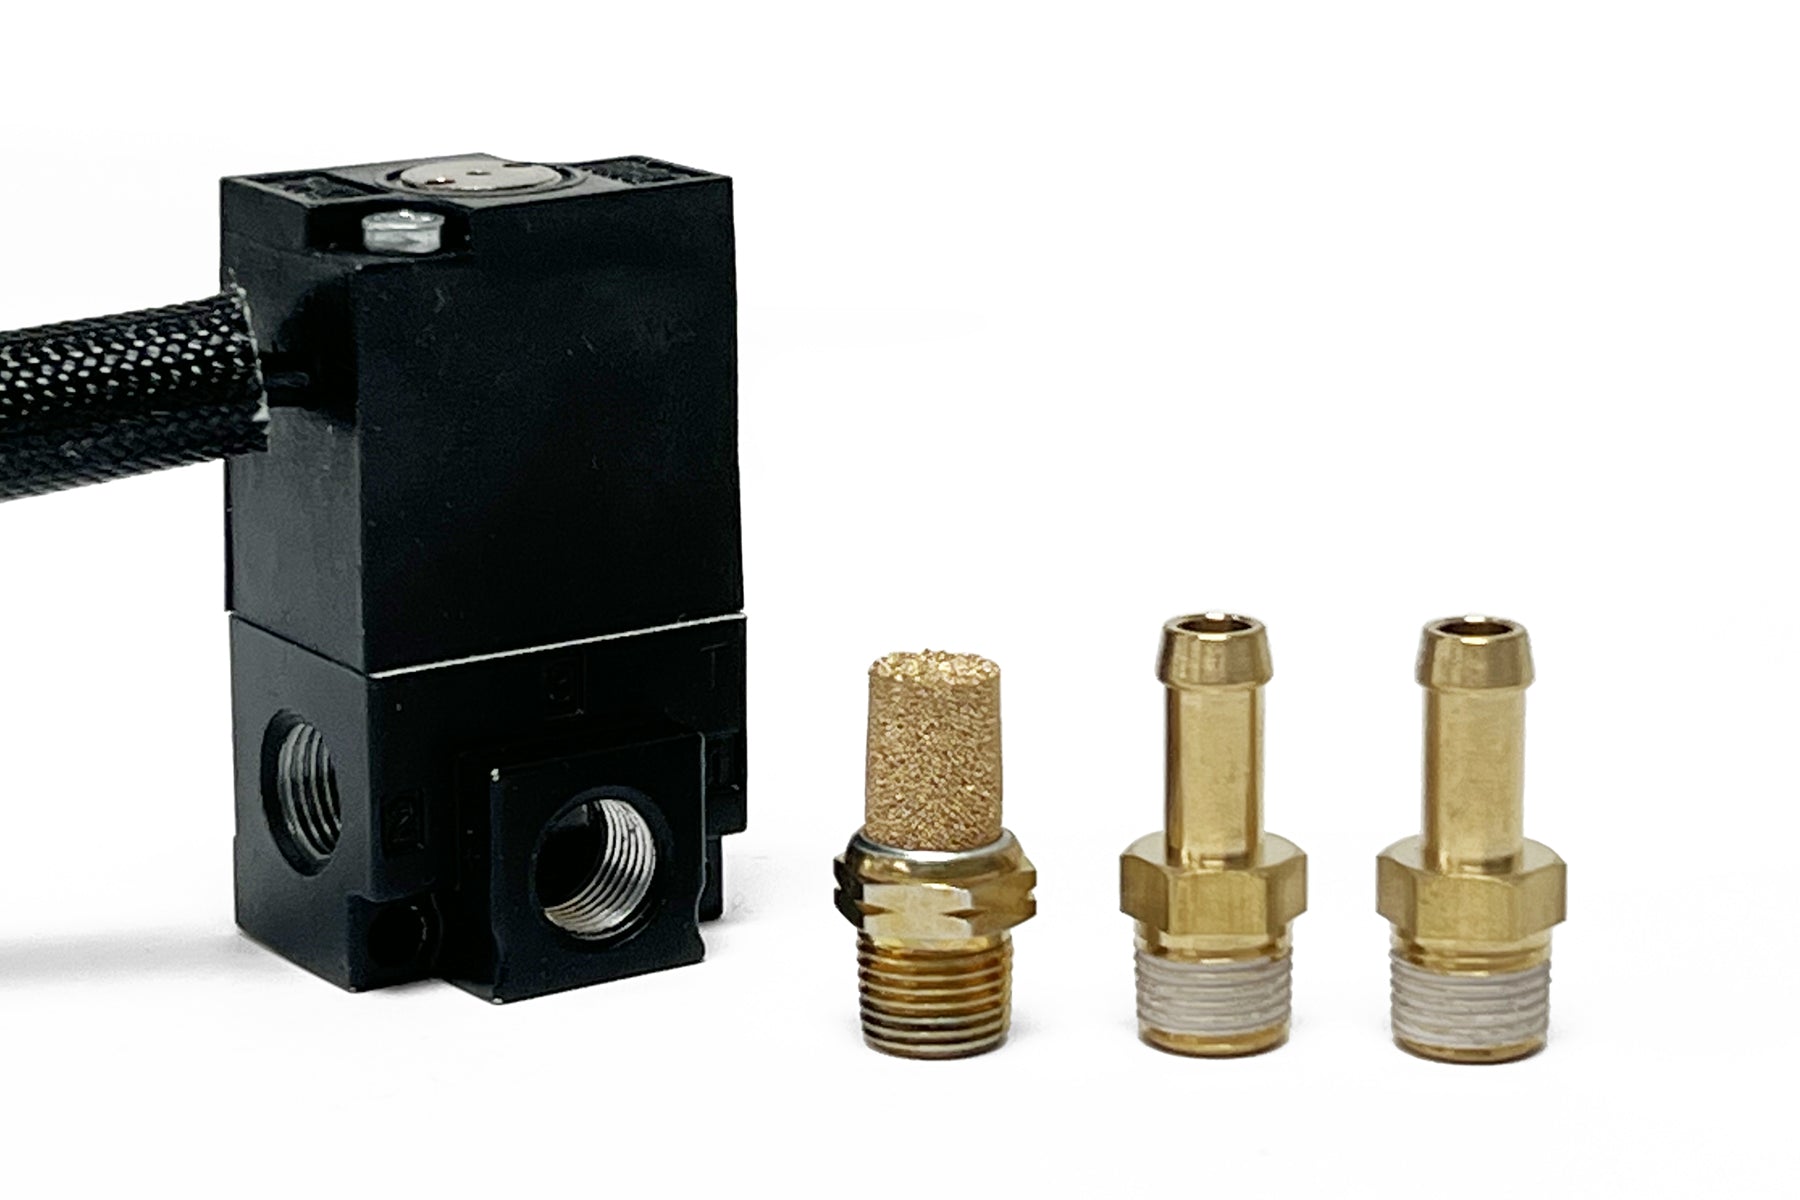 OPTIONAL PROFEC 1/8 CONE OUTLET FILTER - (11901699)